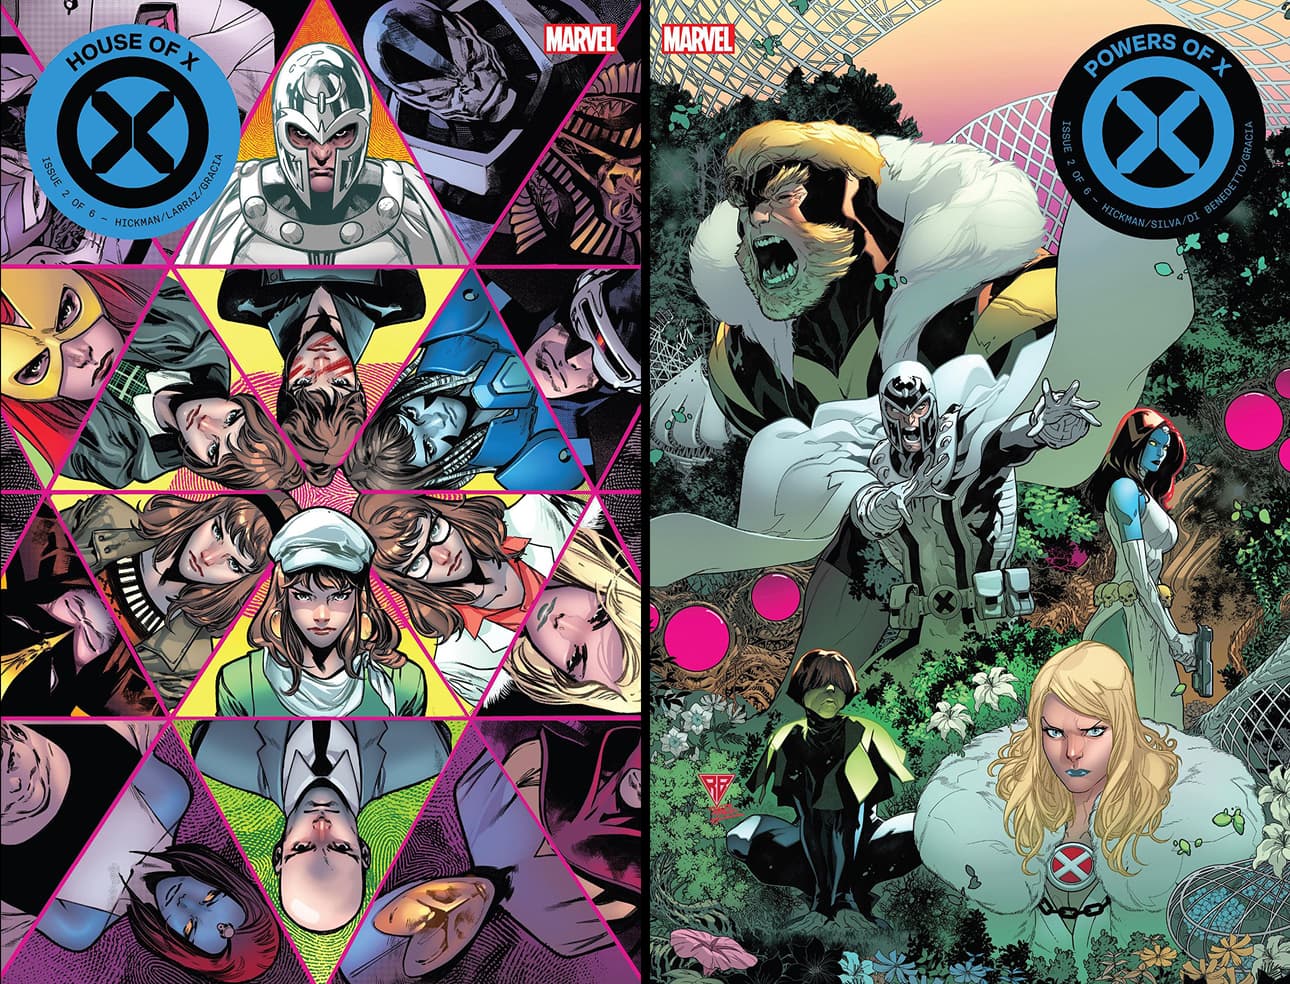 HOUSE OF X #2/POWERS OF X #2